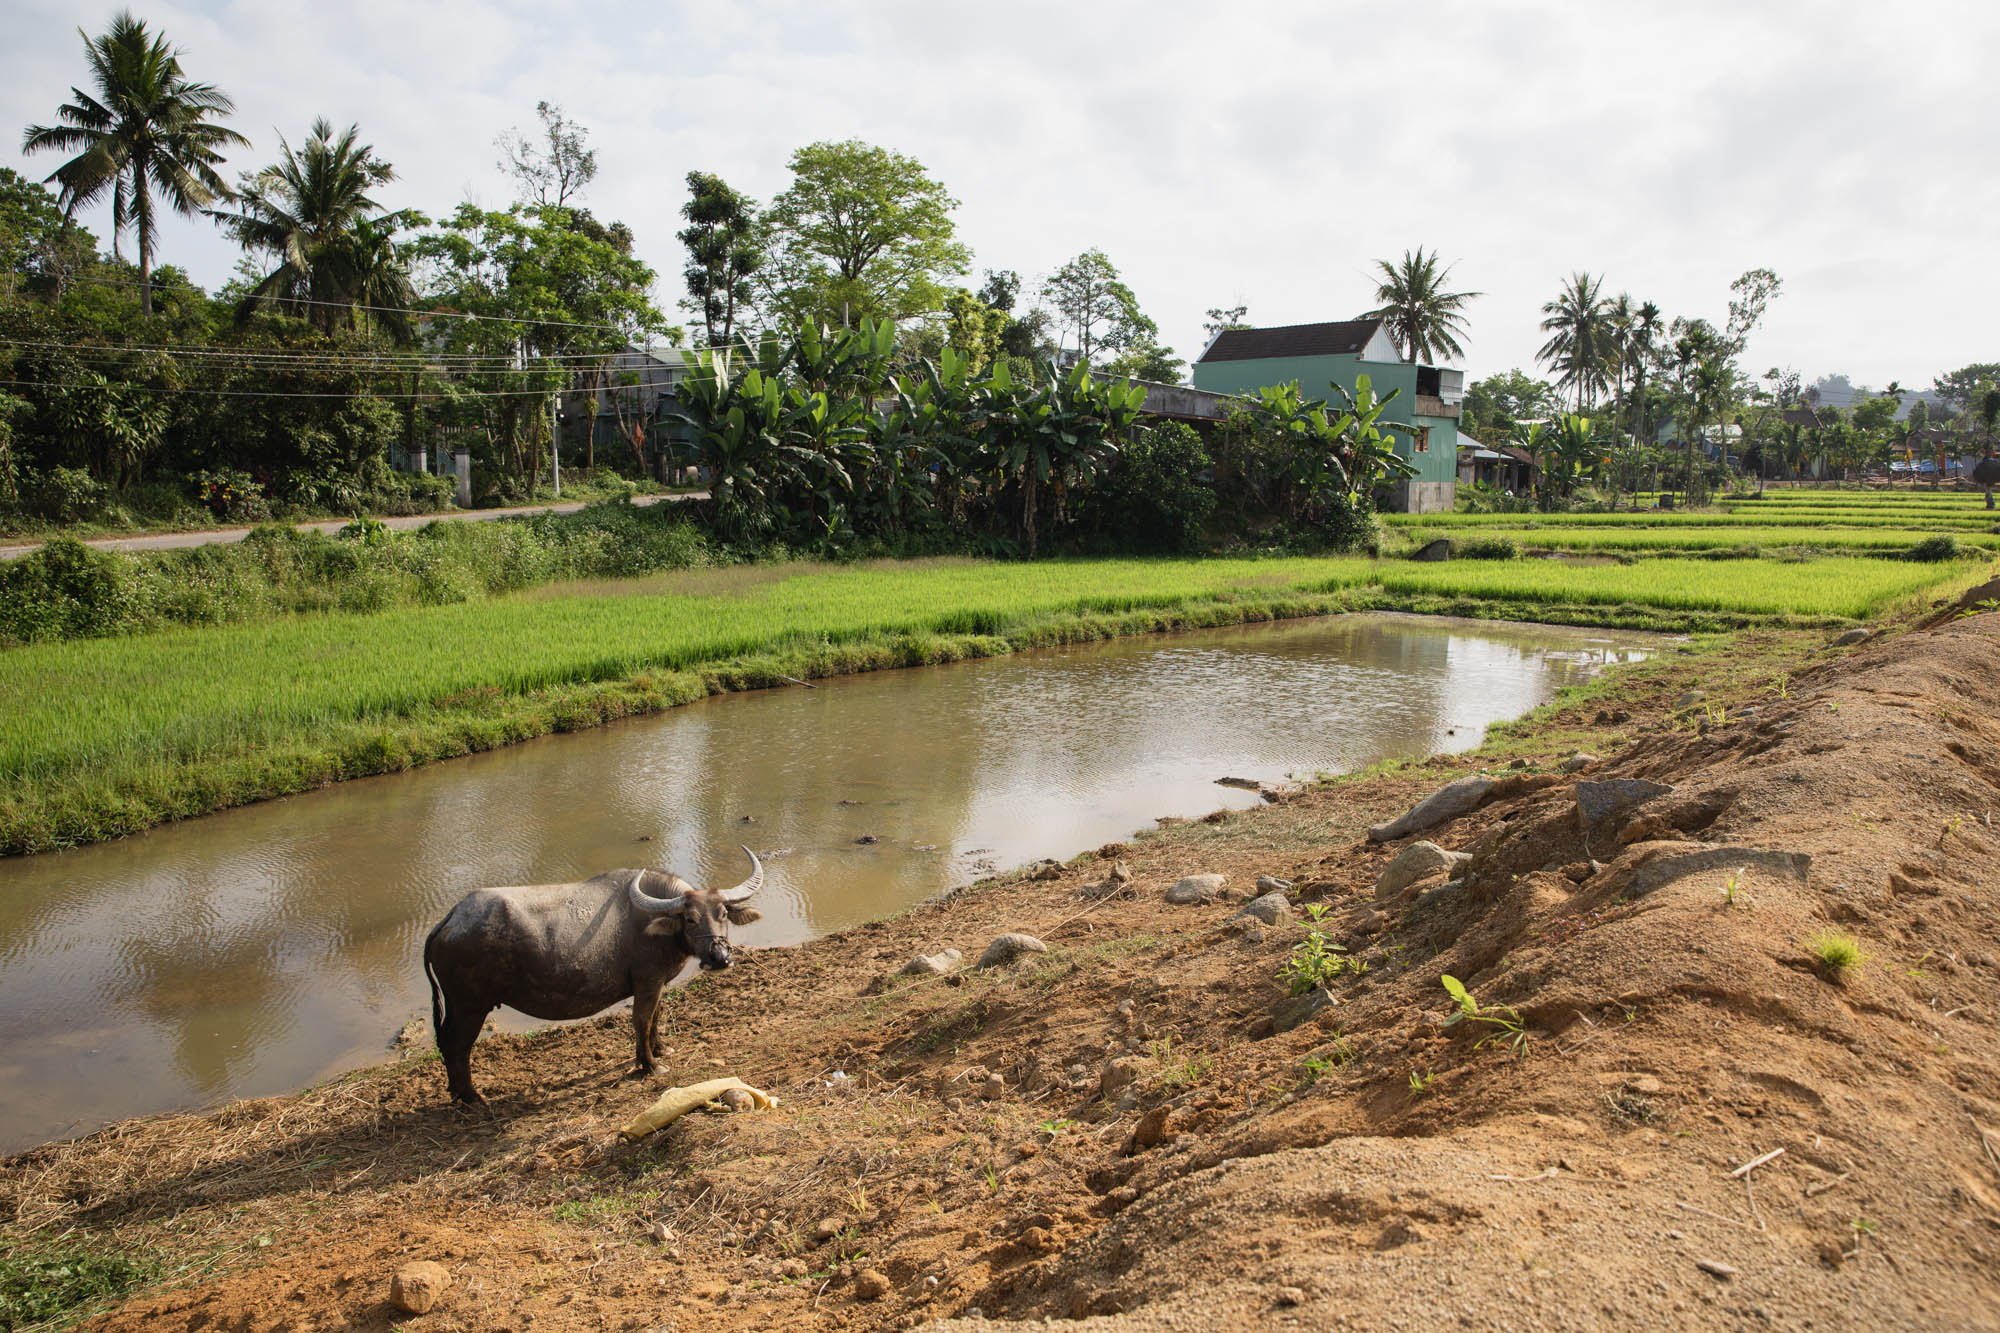 Hoi An rice fields - Top cultural experiences in Hoi An Quang Nam